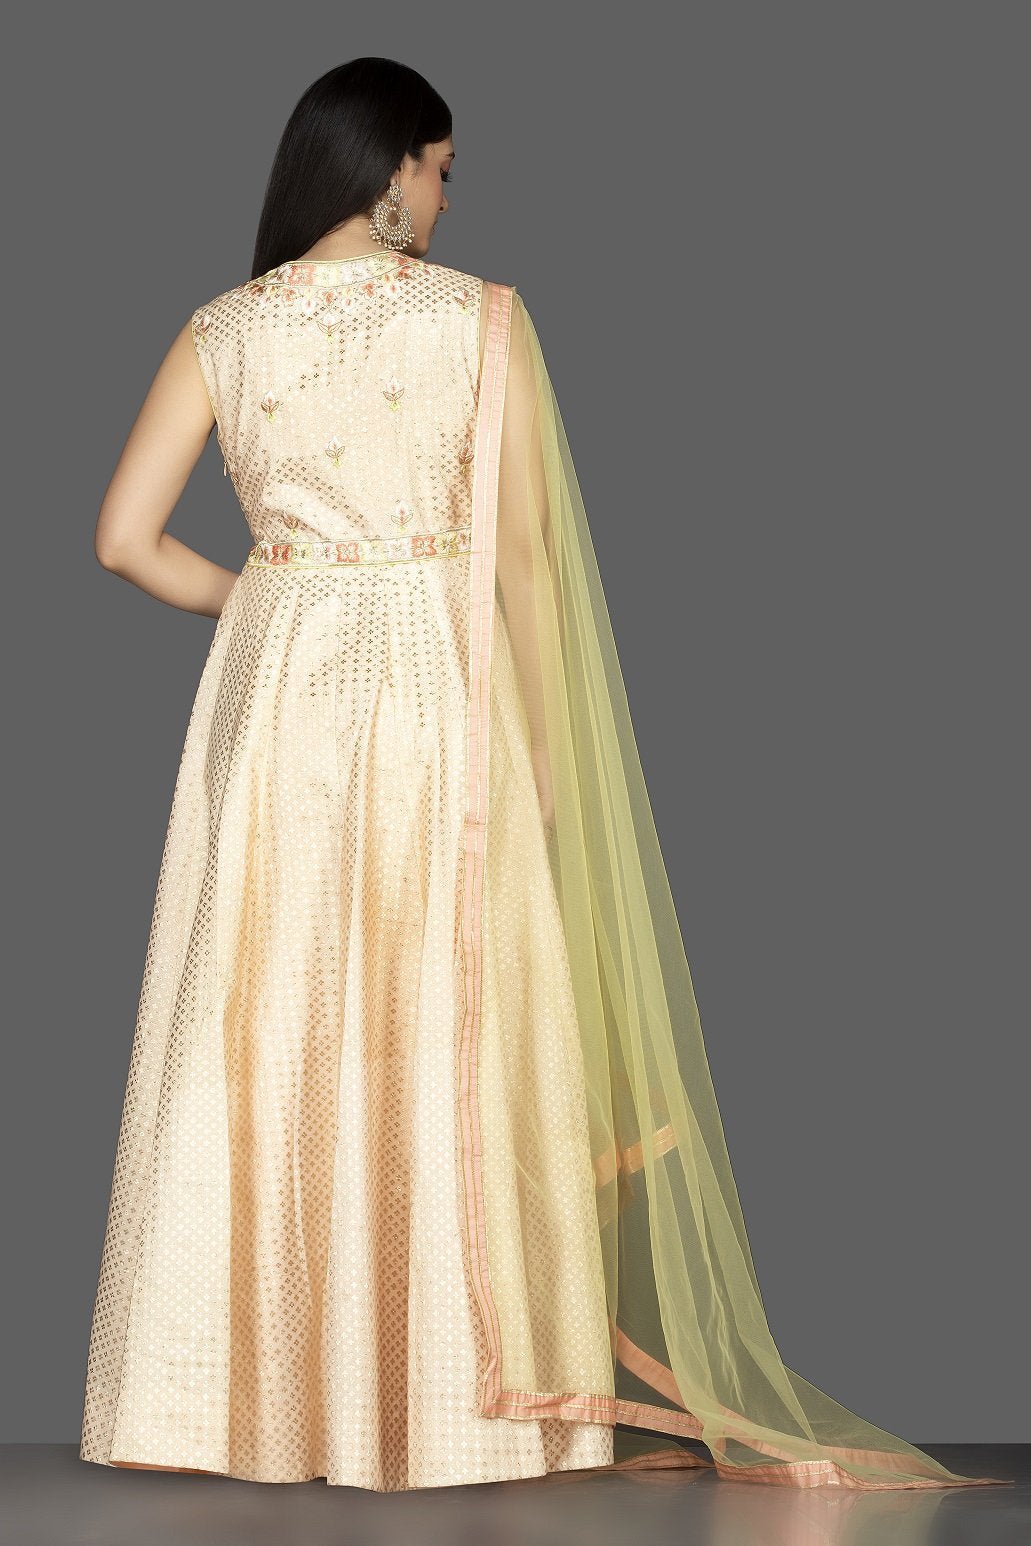 Buy beautiful cream embroidered Banarasi cotton Anarkali suit online in USA with yellow dupatta. Spread ethnic elegance on weddings and special occasions in splendid designer lehengas, Anarkali suits crafted with exquisite Indian craftsmanship from Pure Elegance Indian fashion store in USA.-back